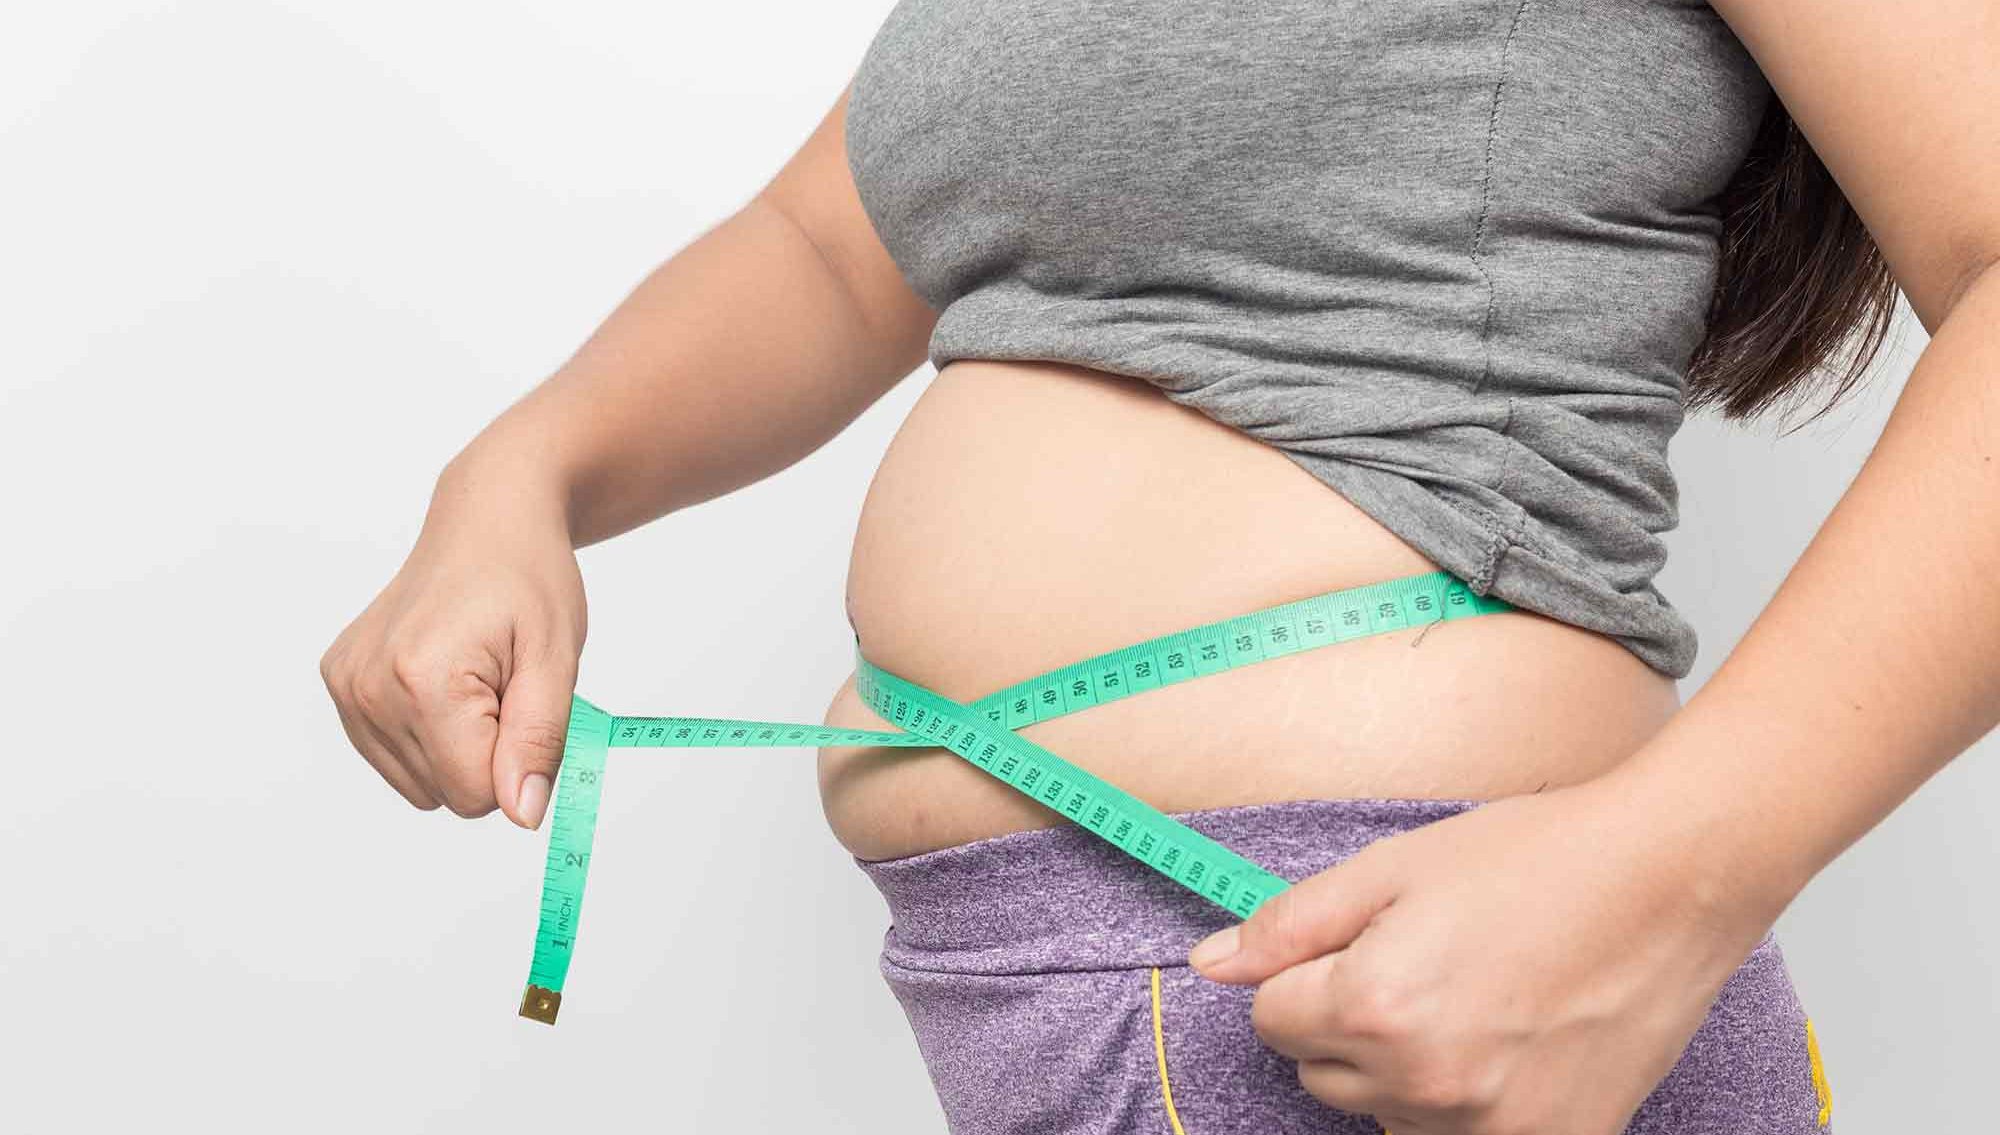 More than three quarters of confirmed COVID-19 cases were people who were overweight or obese